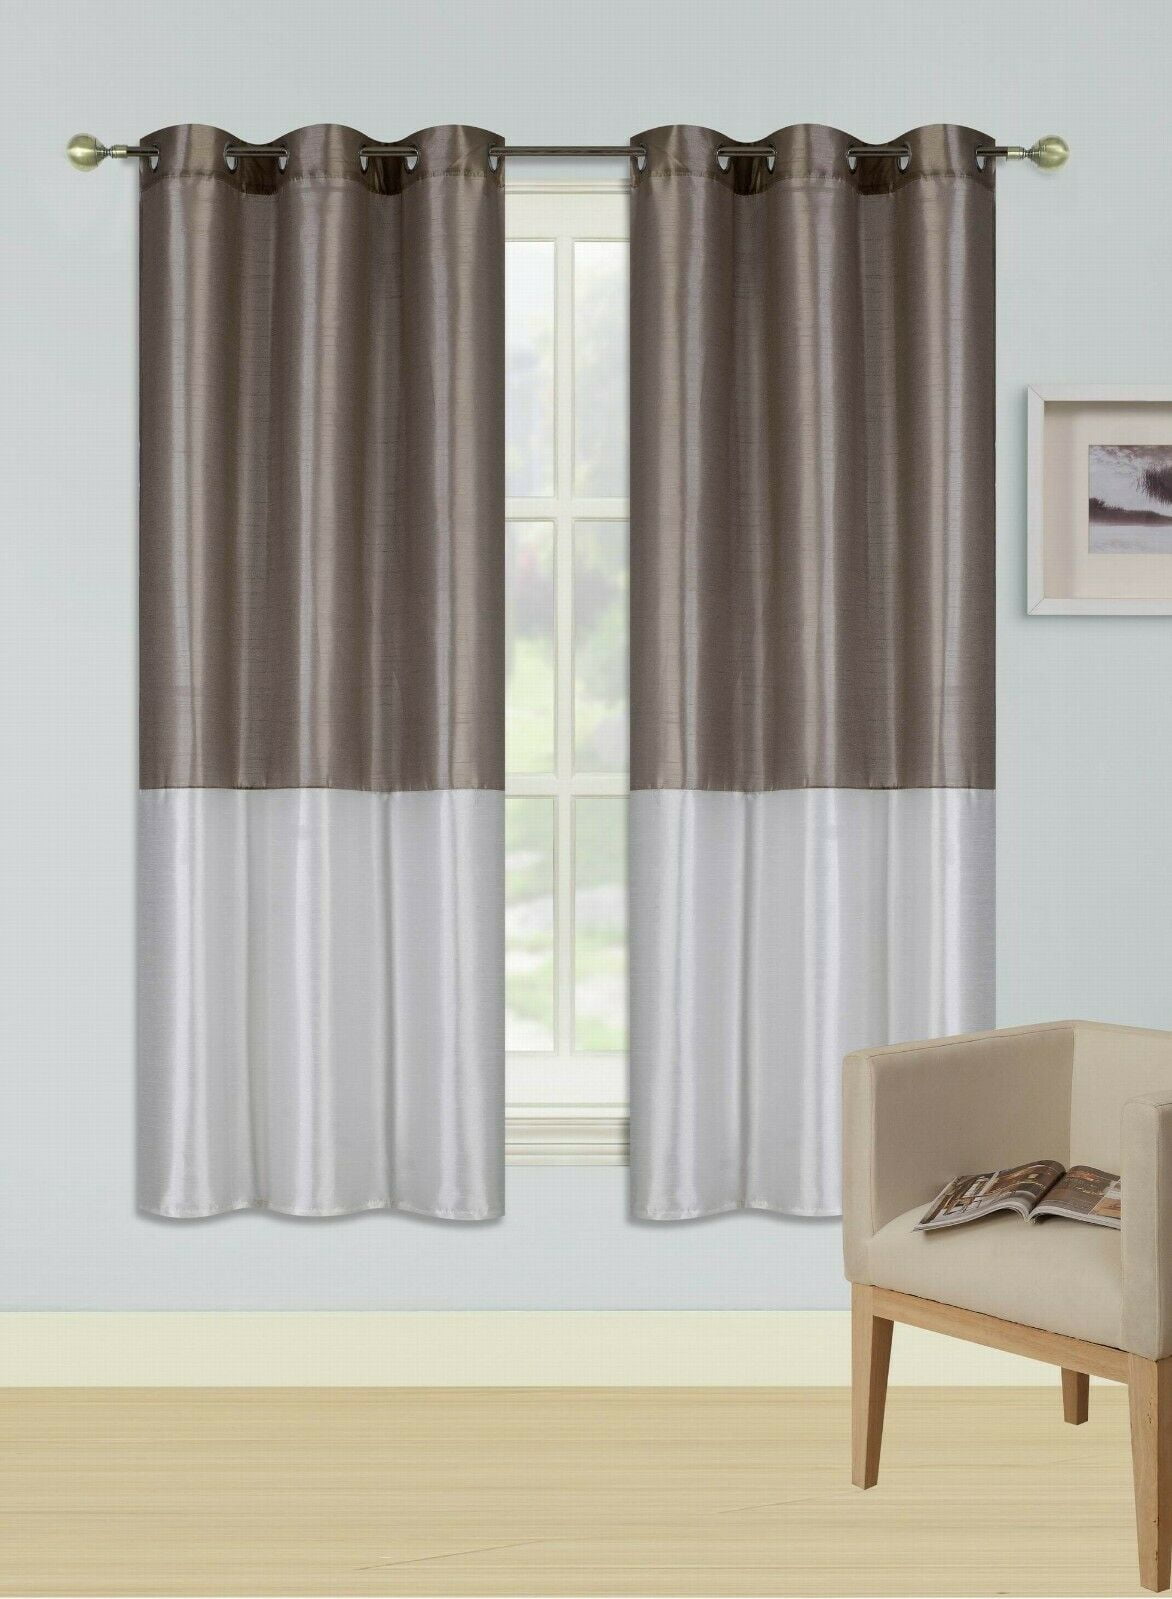 EID WHITE TAUPE CAMEL Insulated Lined Blackout Grommet Window Curtain Panel PAIR 